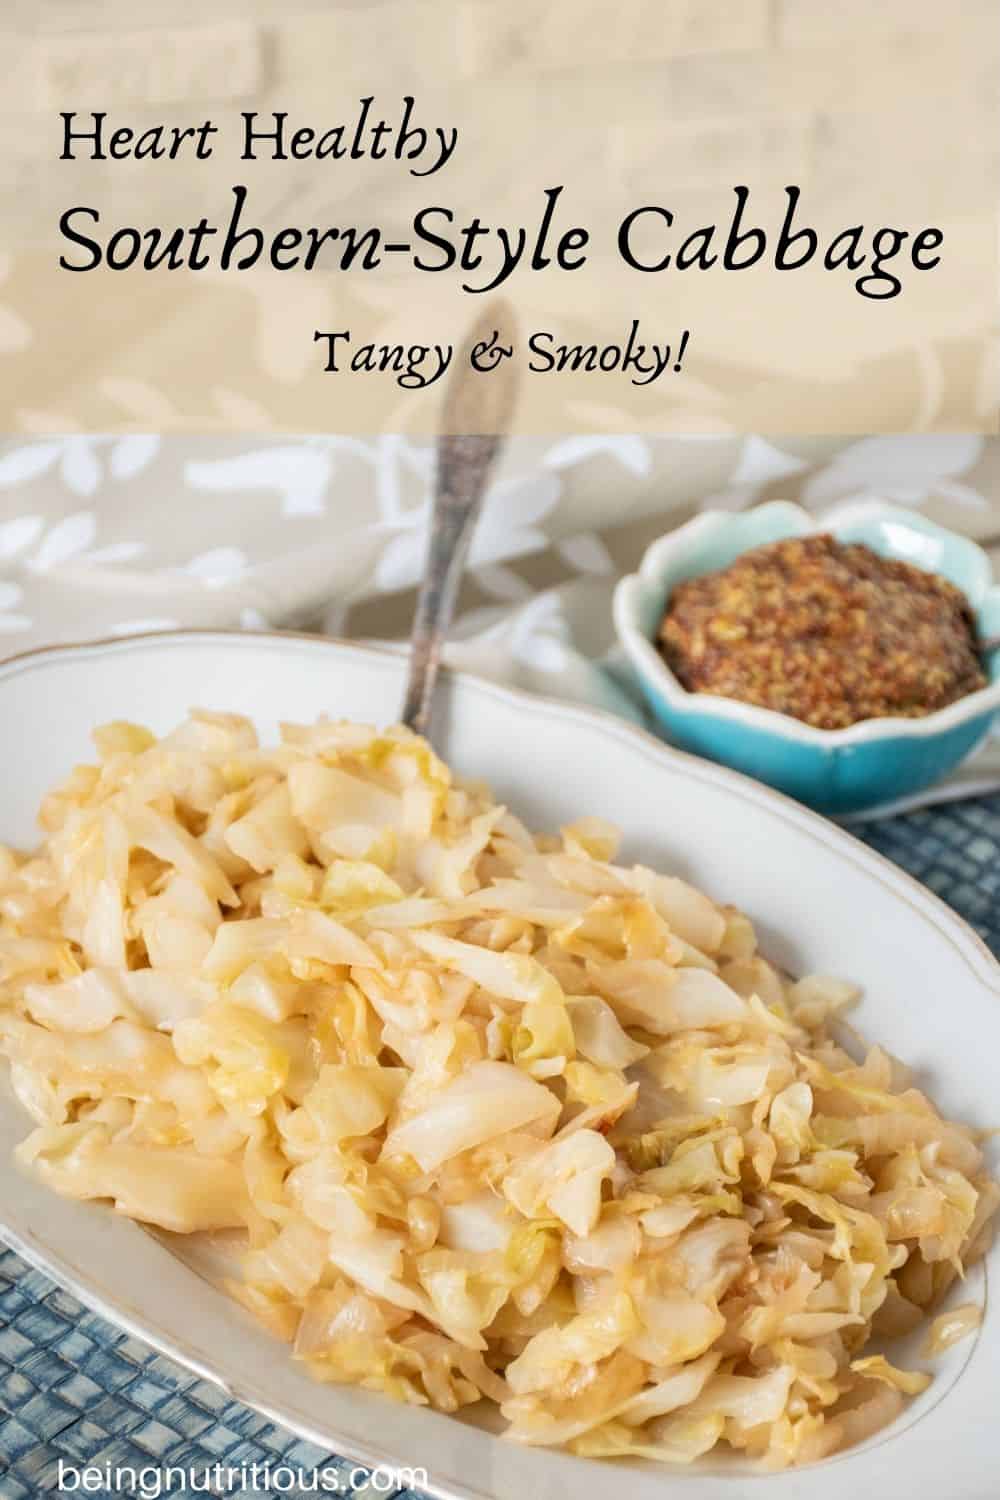 Sautéed cabbage on a plate. Text overlay: Heart Healthy Southern-style cabbage; tangy and smoky!